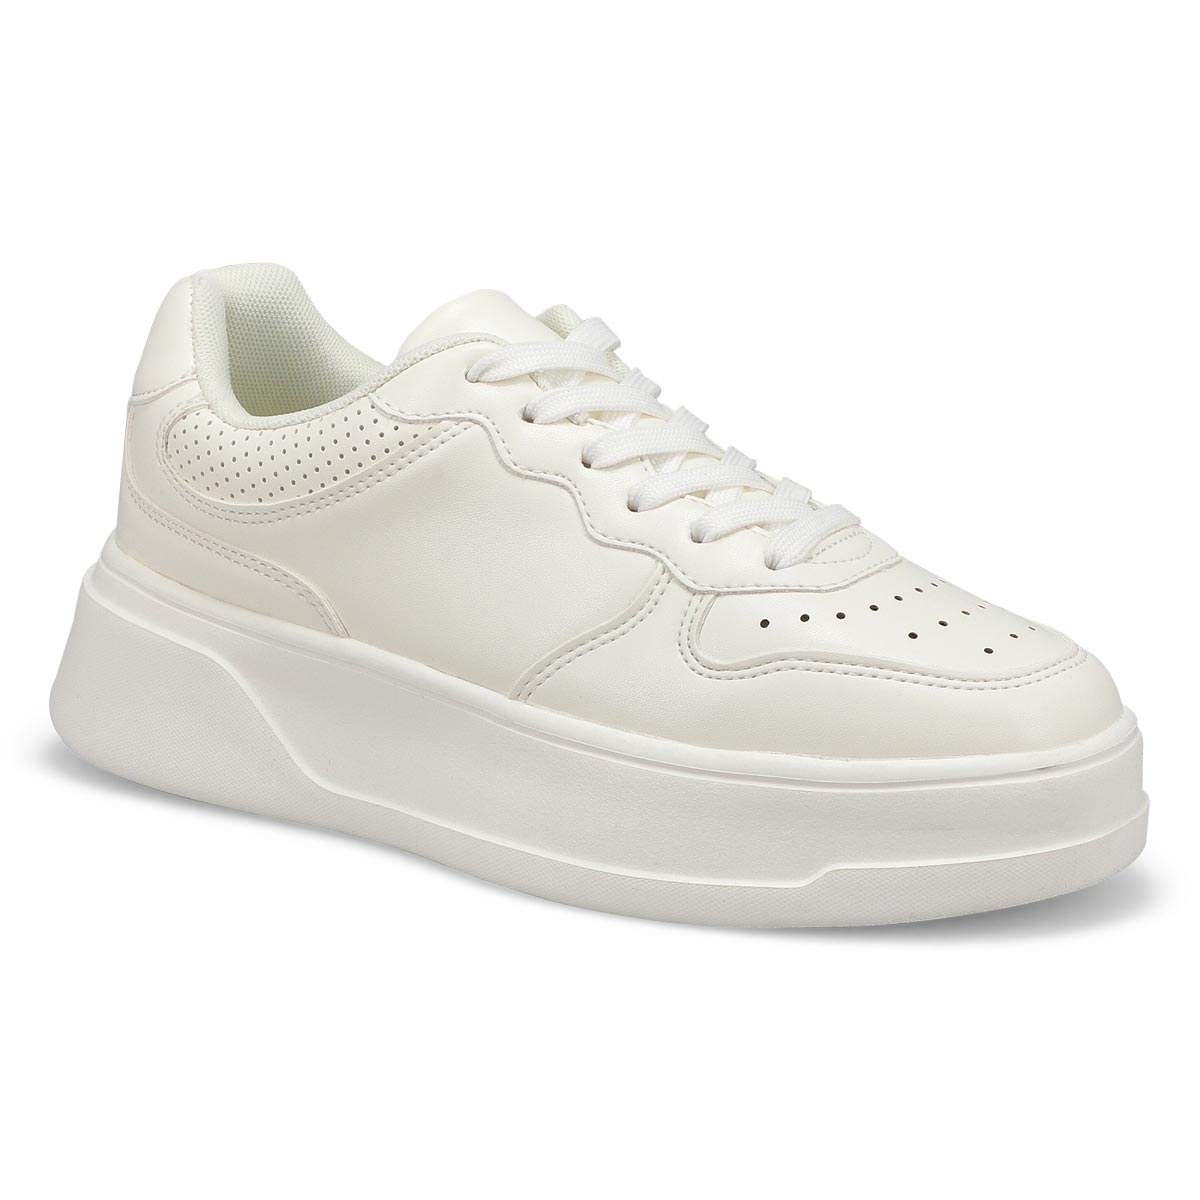 Women's Becket Lace Up Sneaker - White